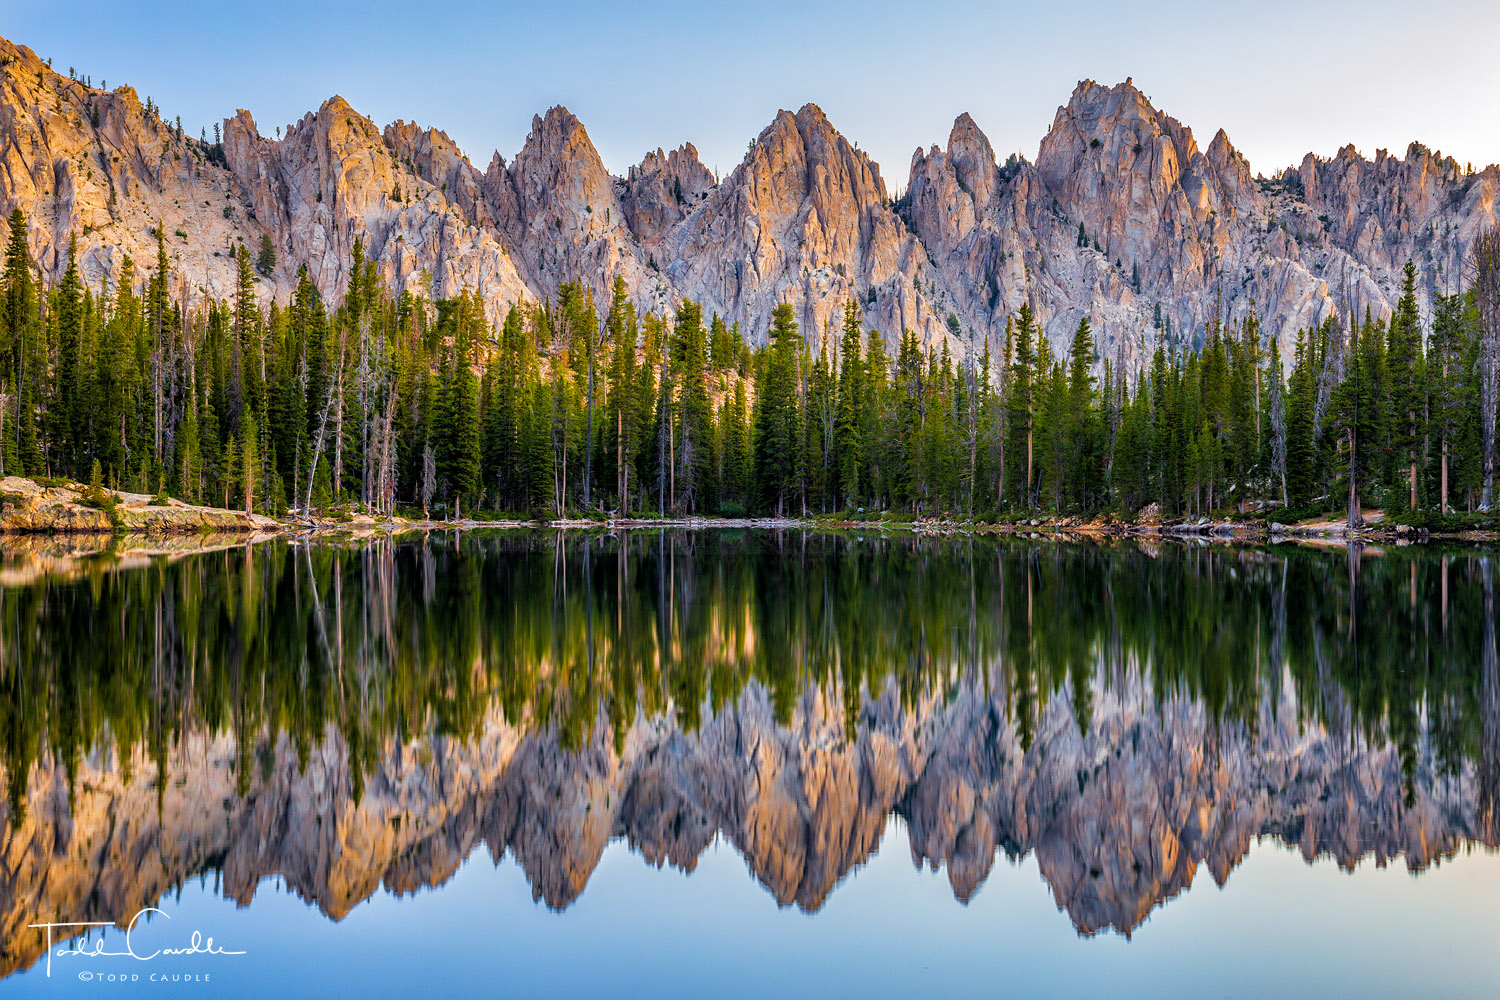 A serrated ridge in the Sawtooths Wilderness reflects in a lake at sunrise.